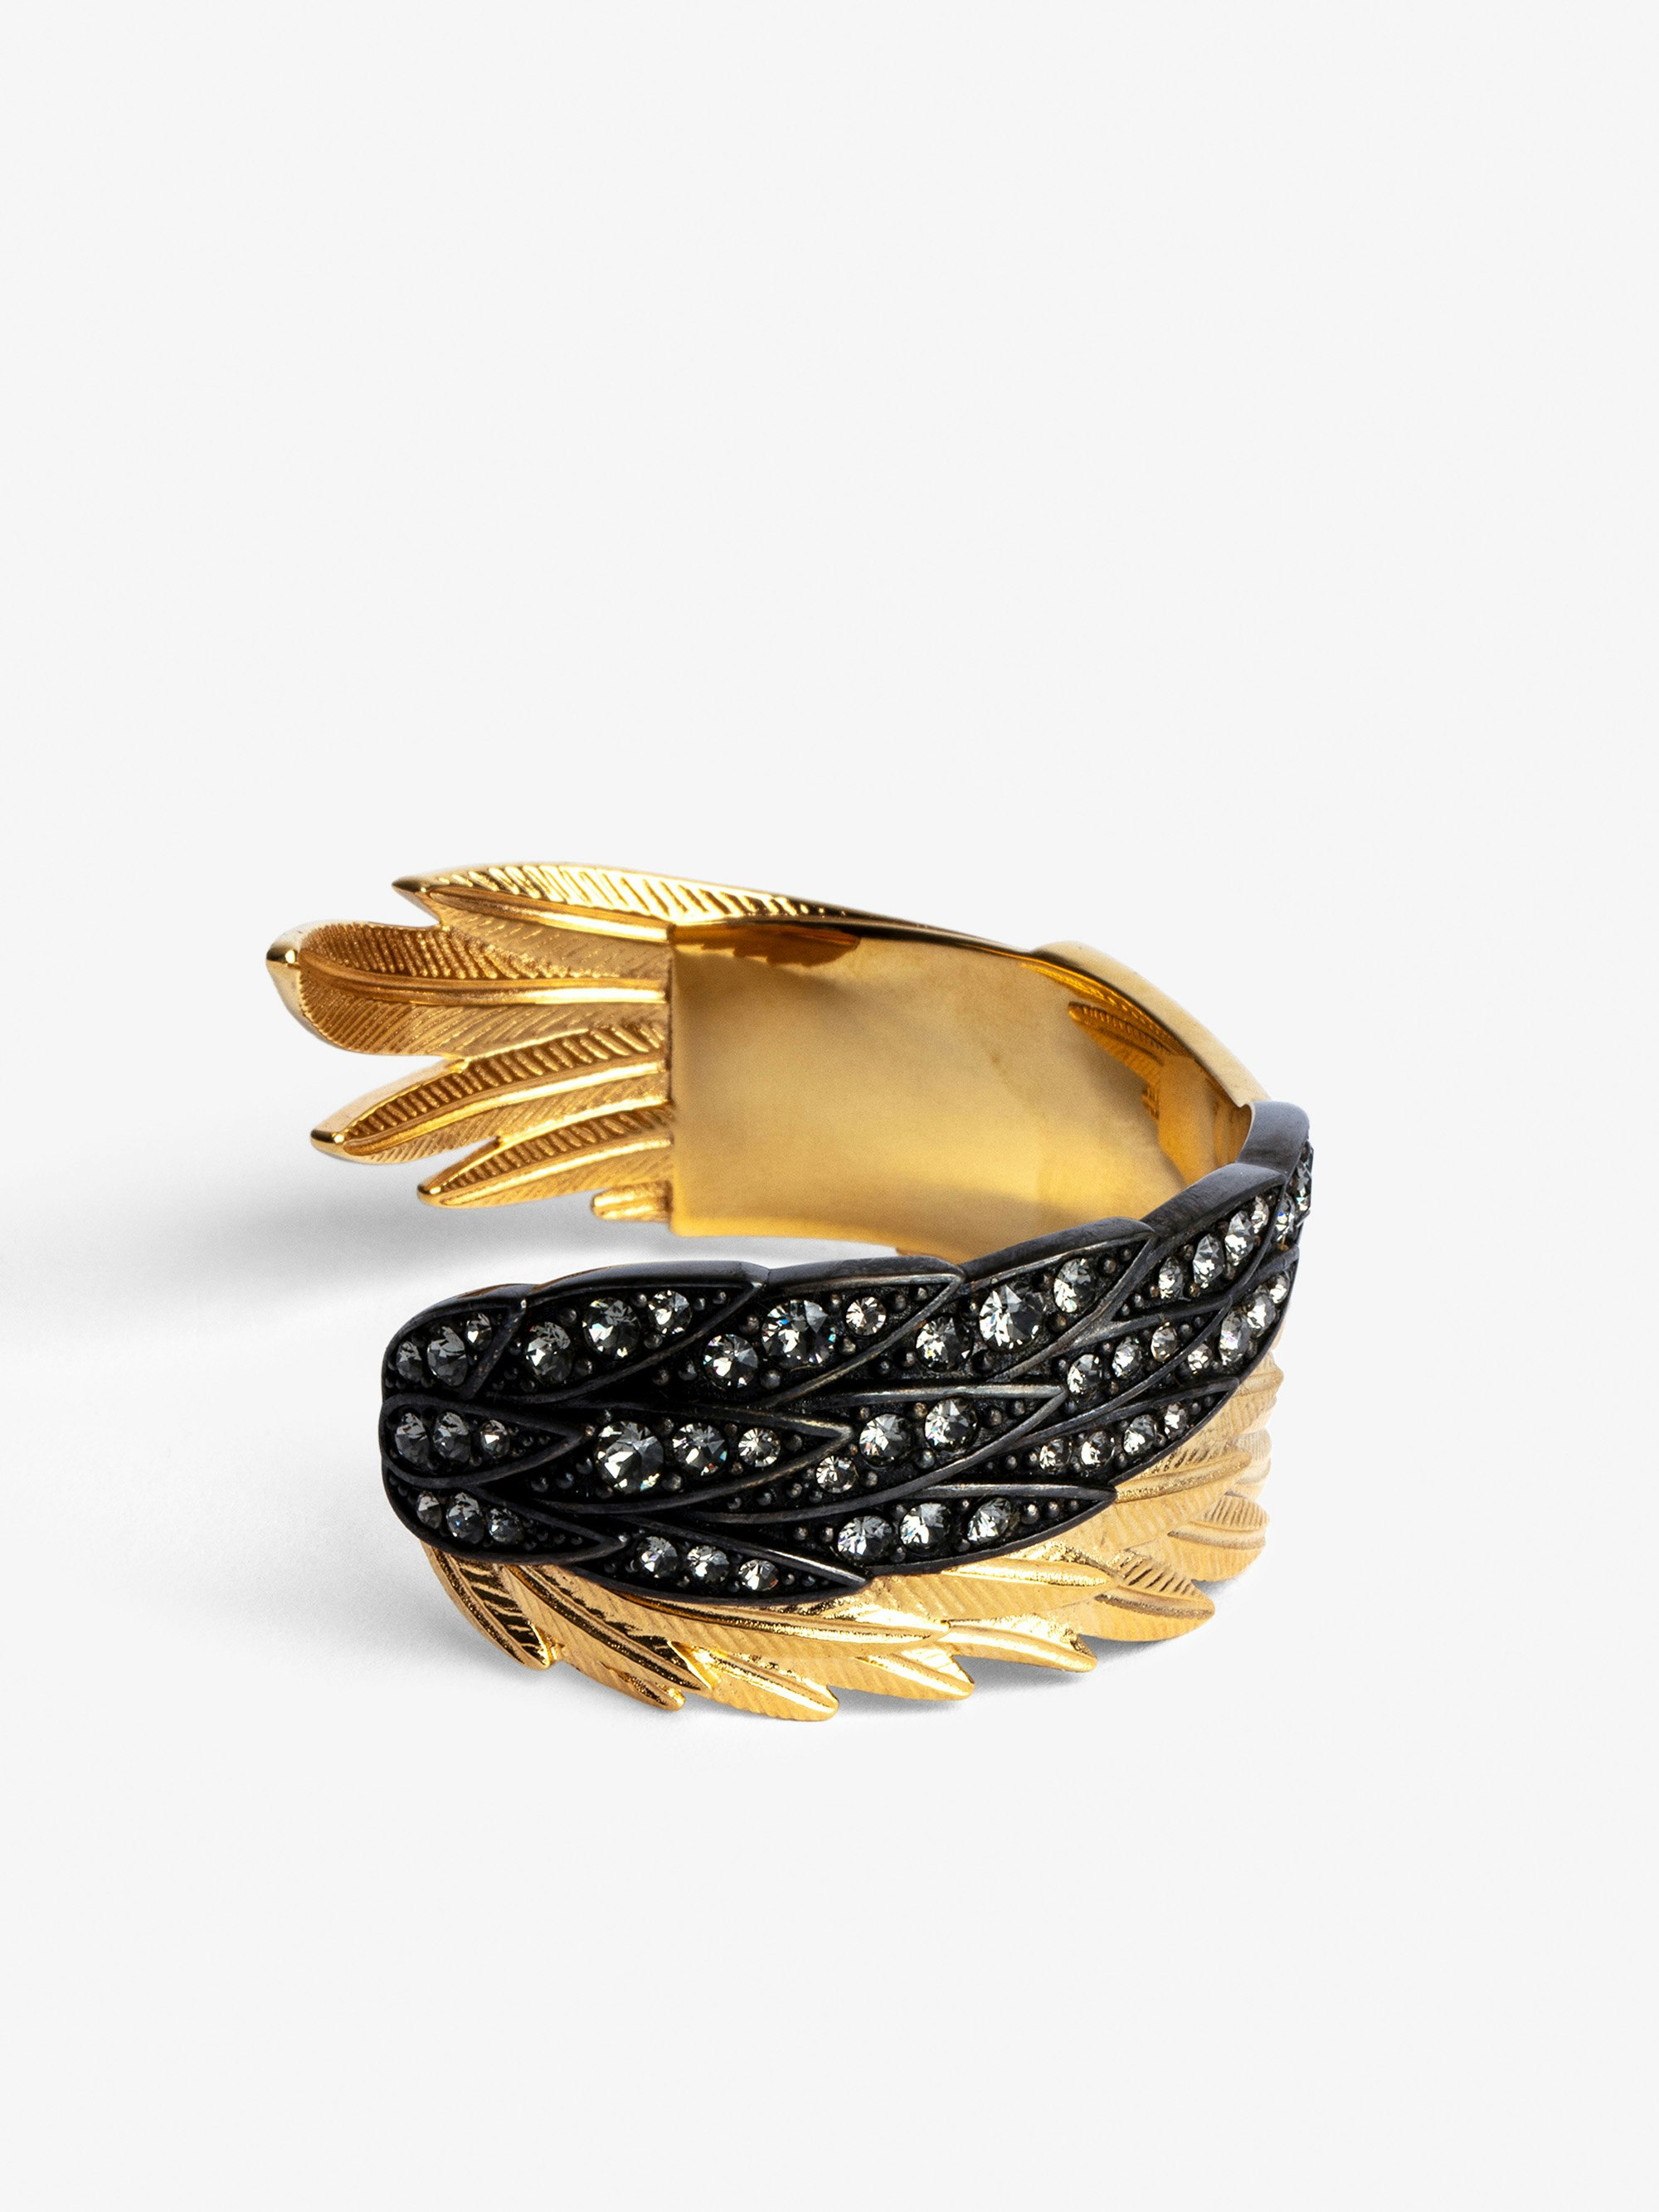 Rock Feather Spread Your Wings Bracelet - Blackened and gold-tone brass bangle.